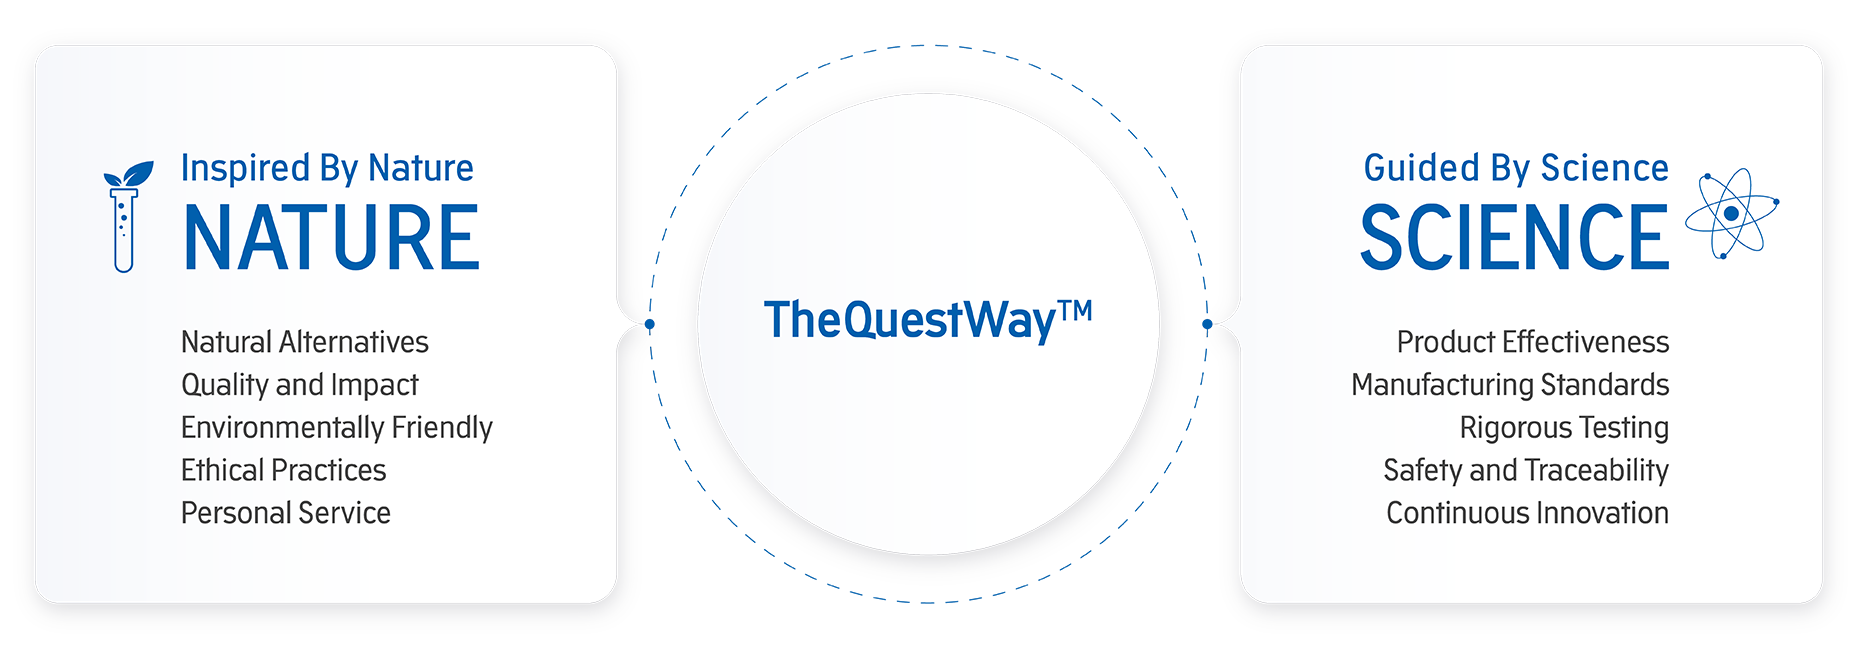 TheQuestway